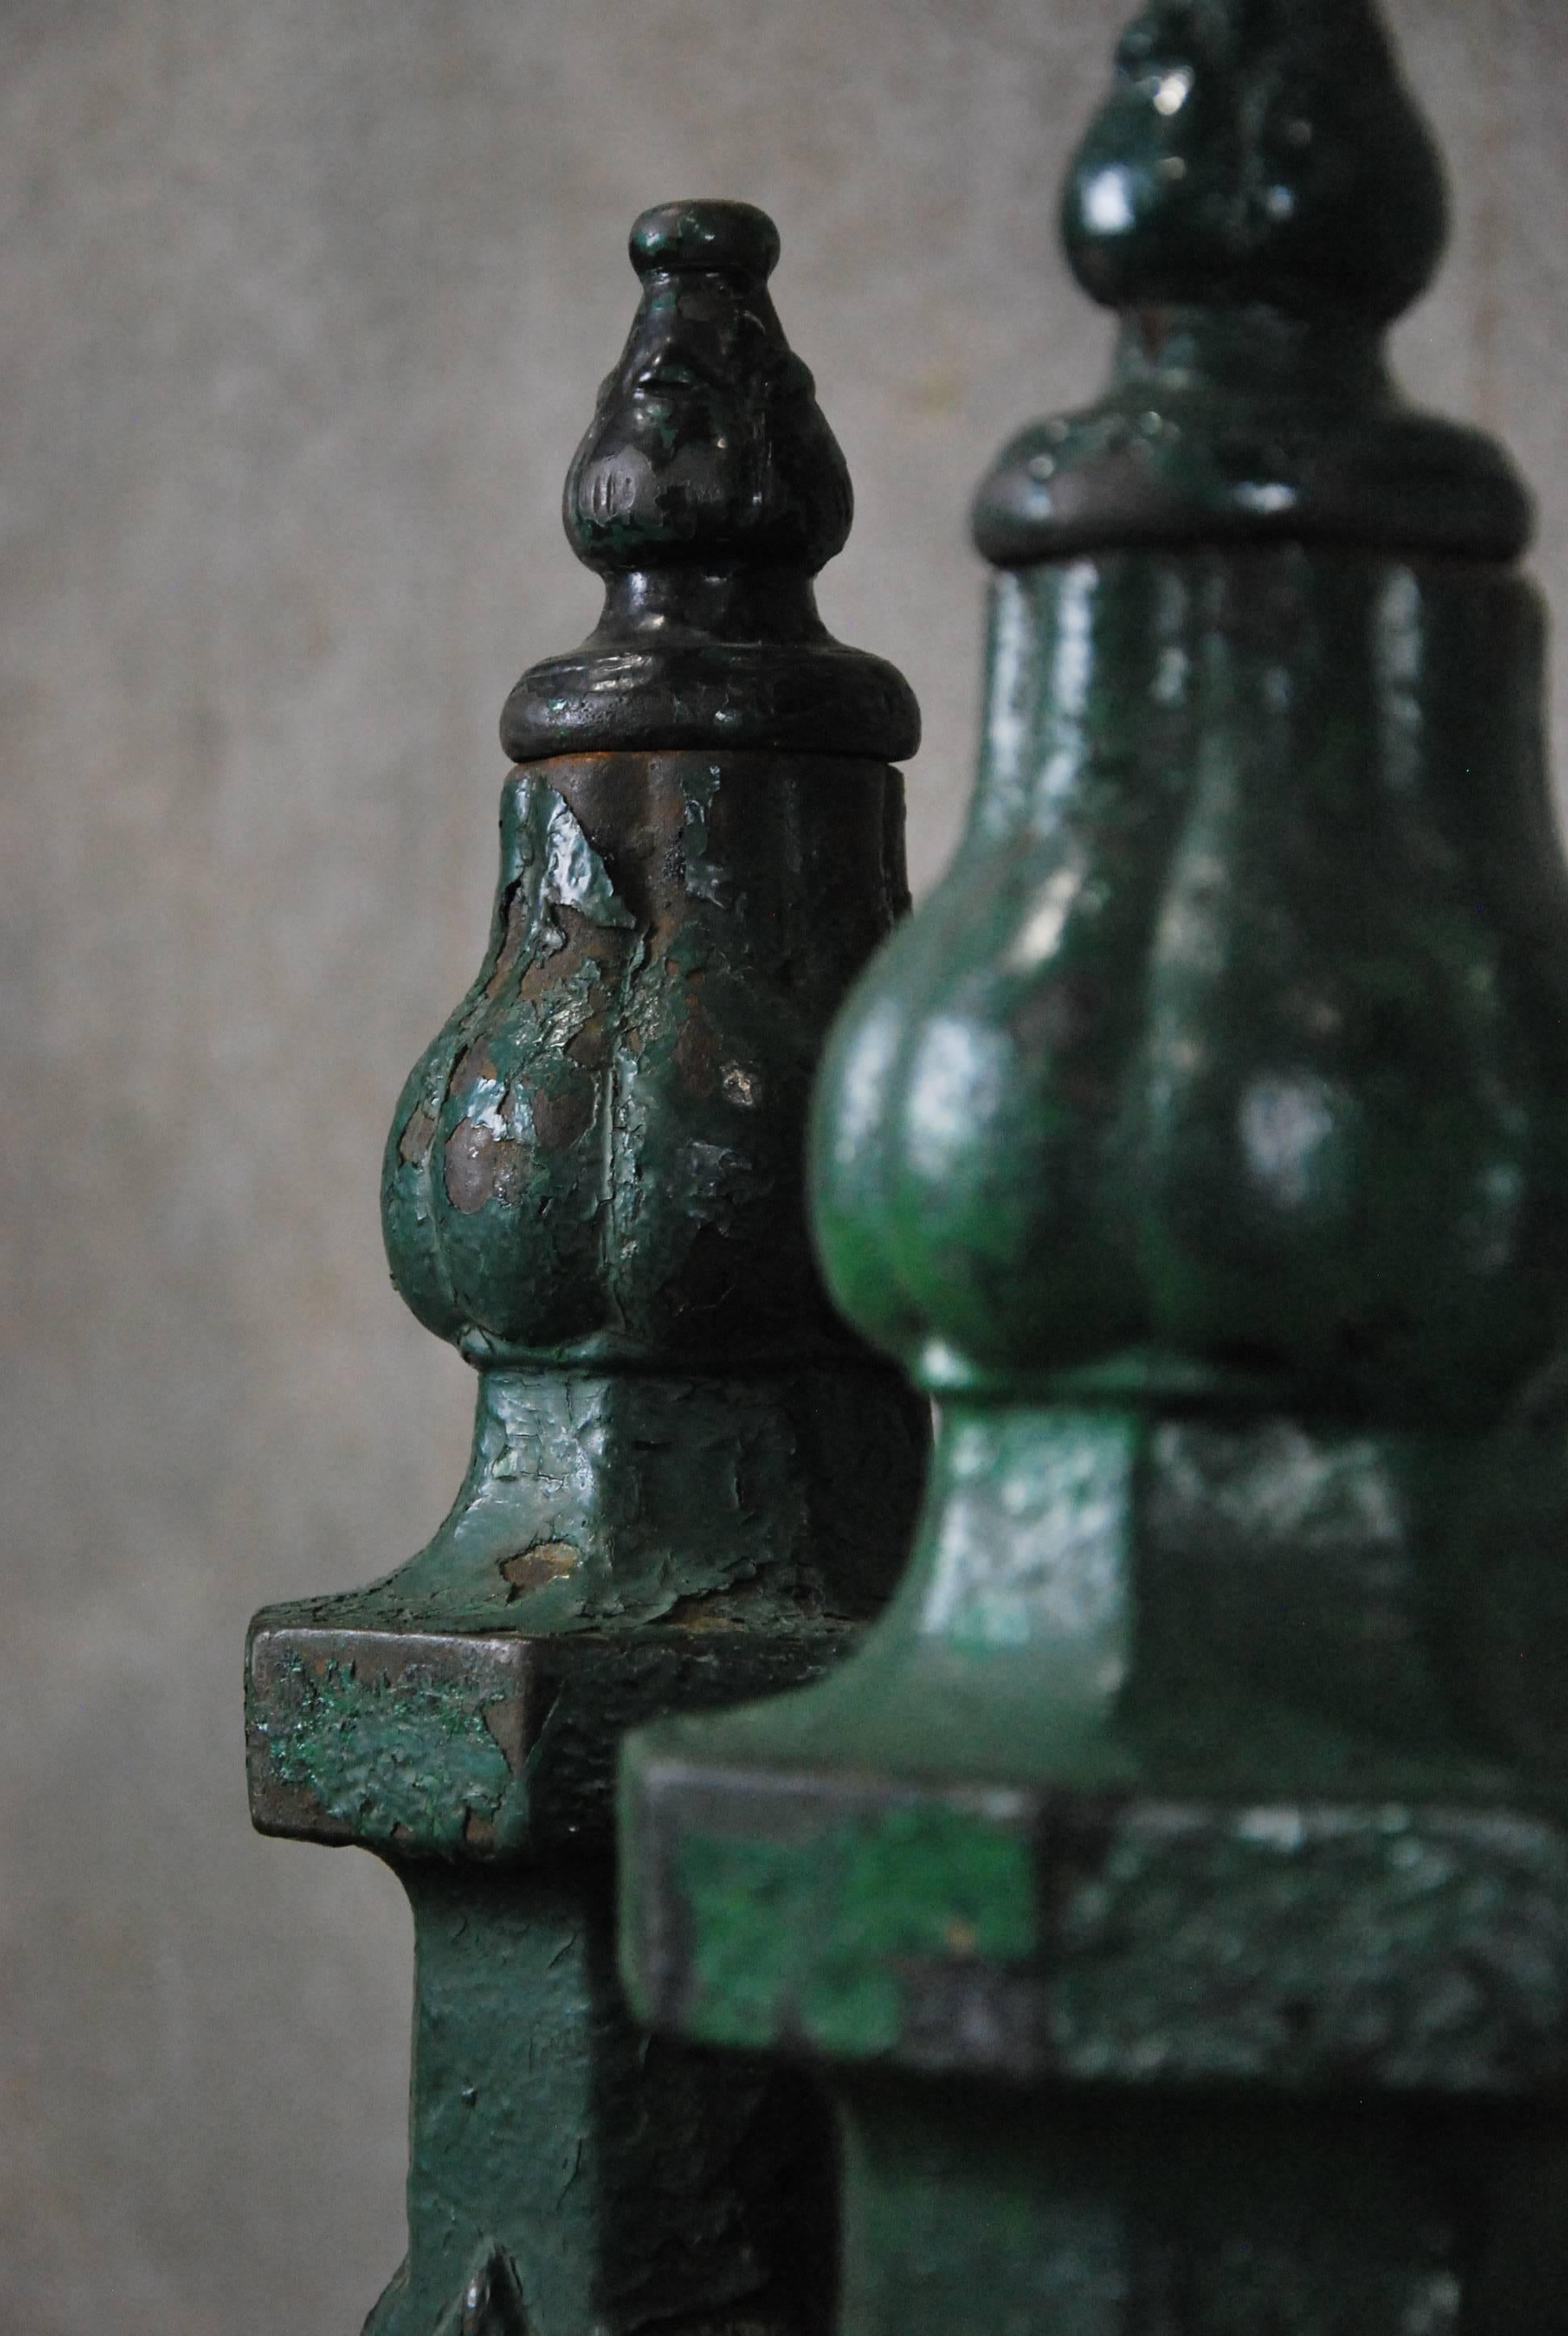 Very nice and complete pair of newel post with strong French motif in oxidized green paint over cast iron.

The post are nice and tall allowing for easy implementation to any design project.

Found in Chicago.